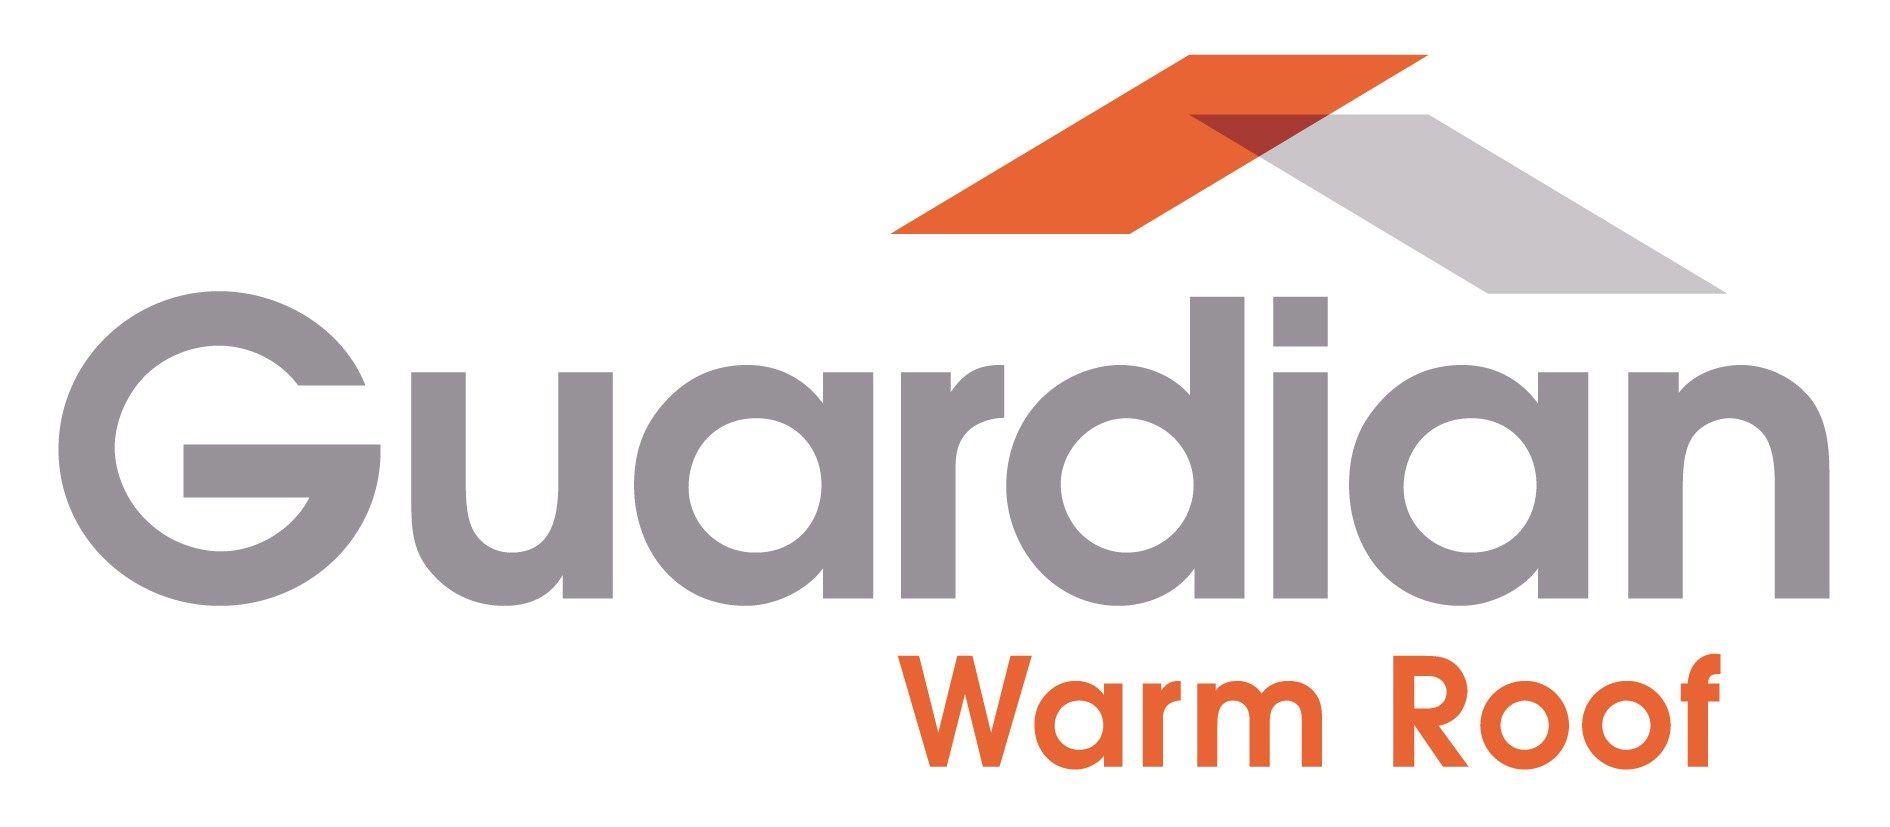 Orange Roof Logo - Guardian Warm Roof Logo (2) | Connaught Conservatory Roofs